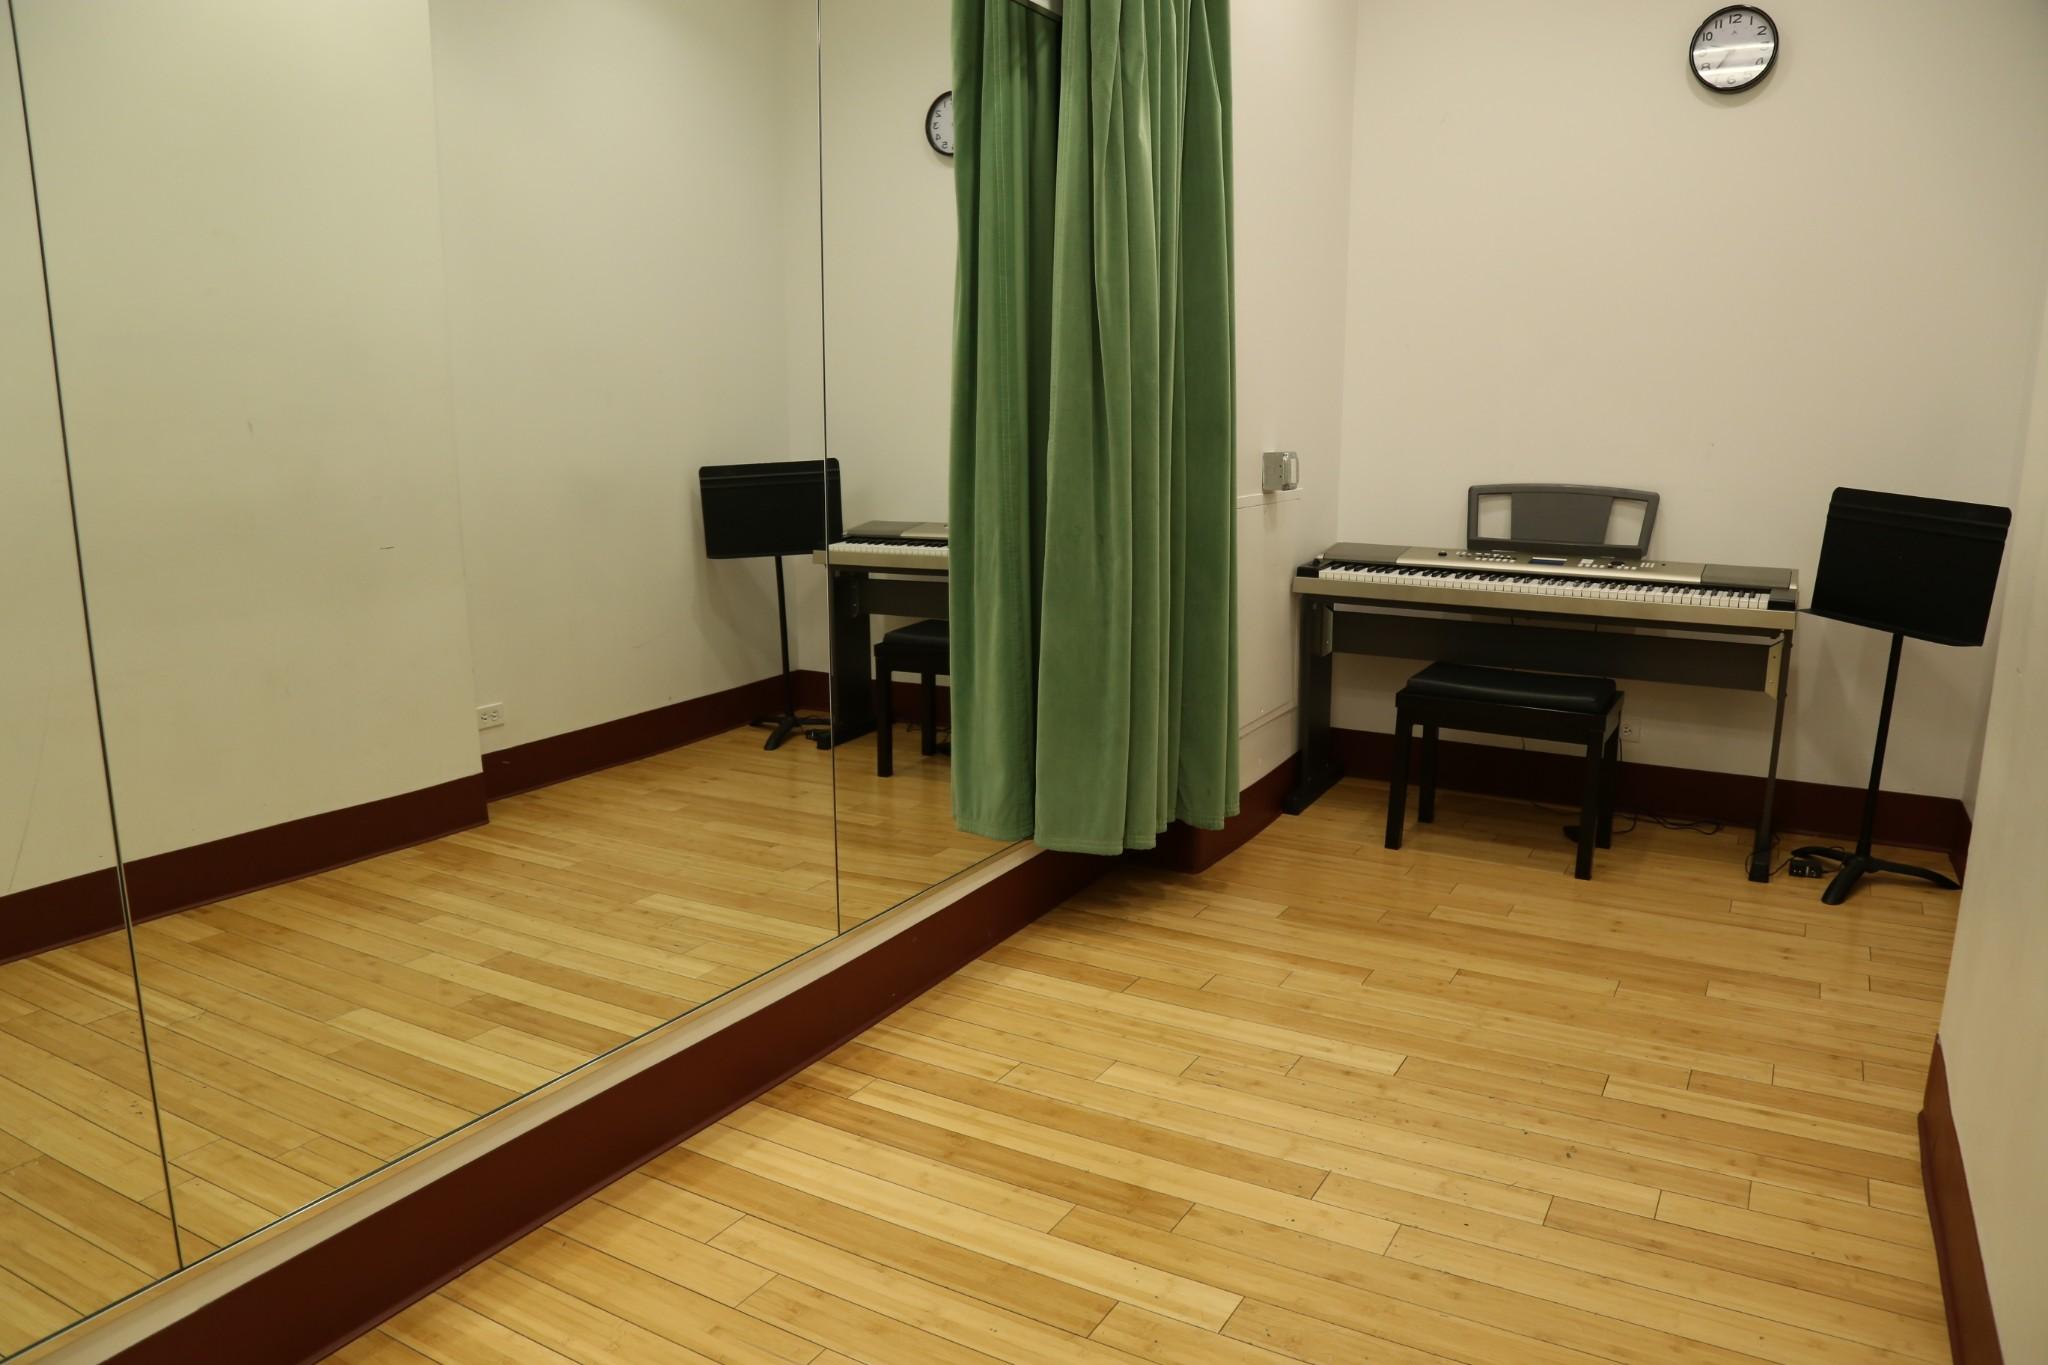 Ripley Grier Studios 38th Street For Rent In New York Ripley